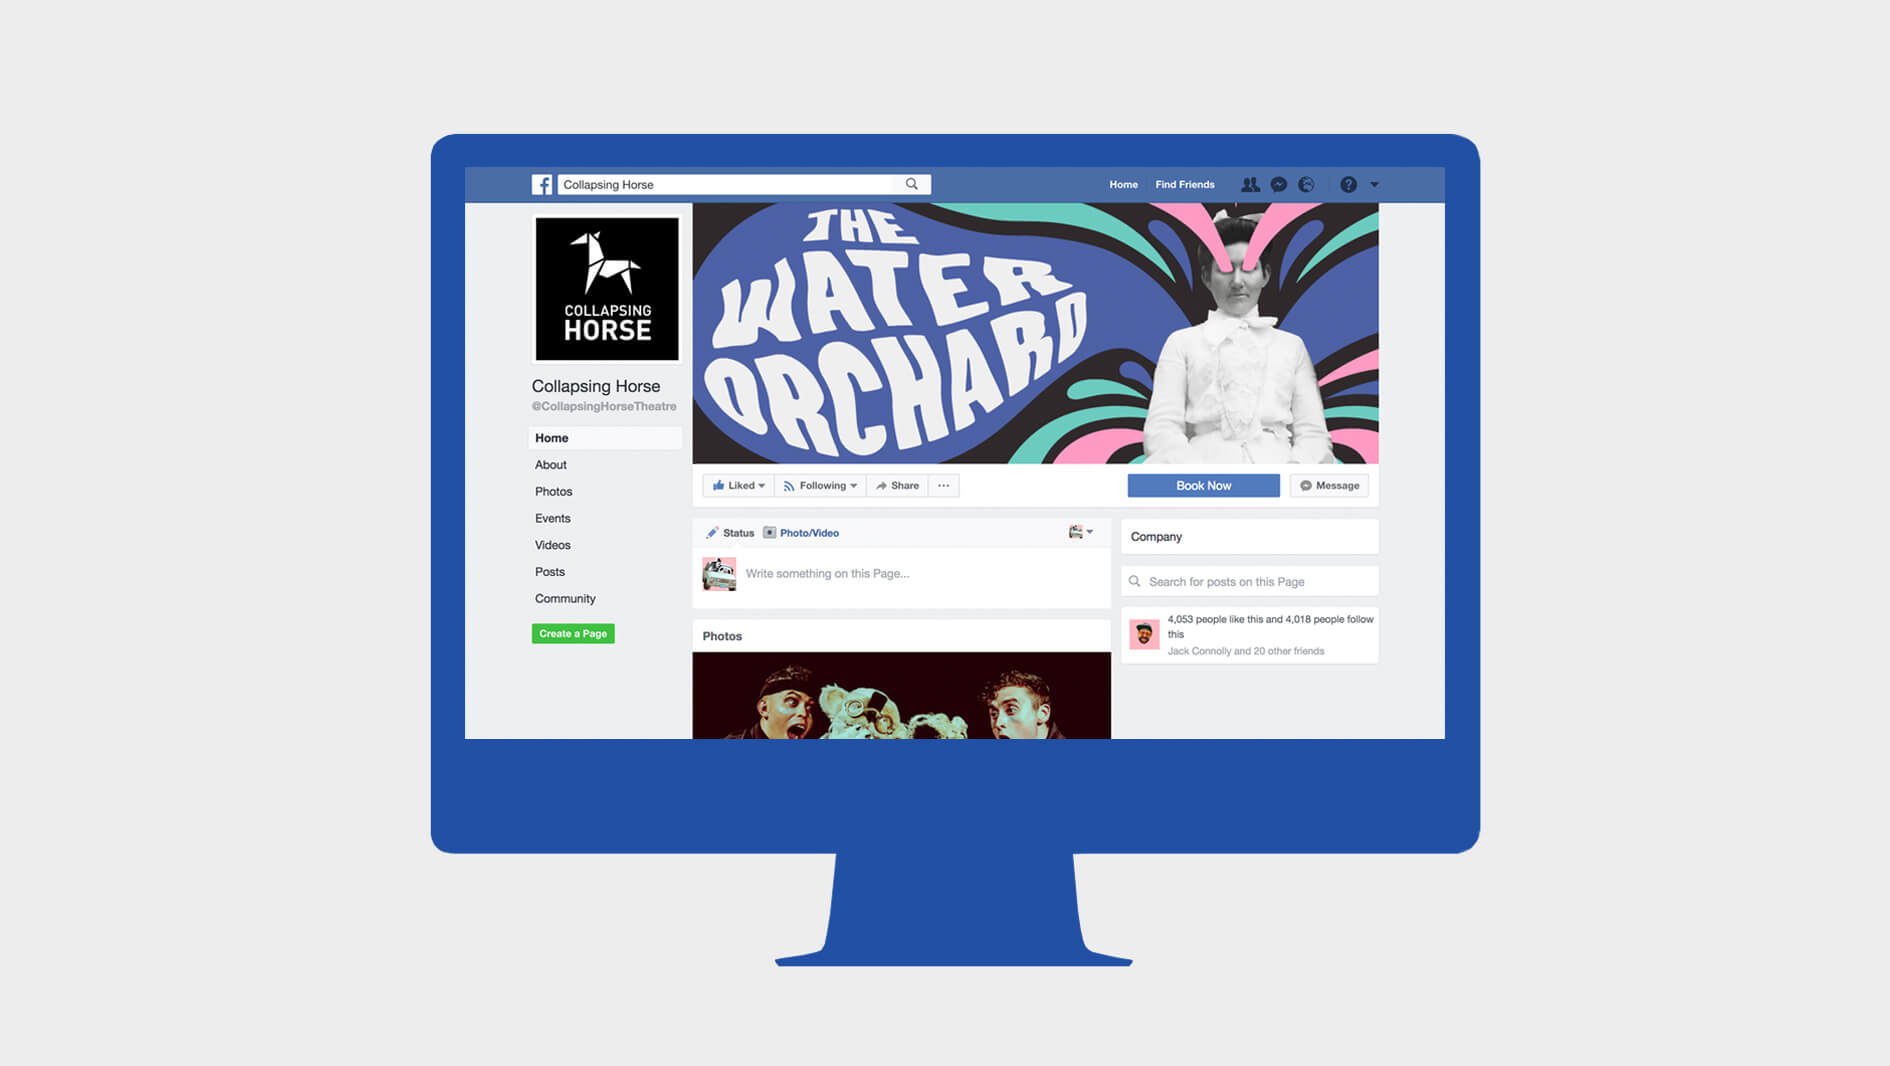 Collapsing Horse / The Water Orchard – Social Media